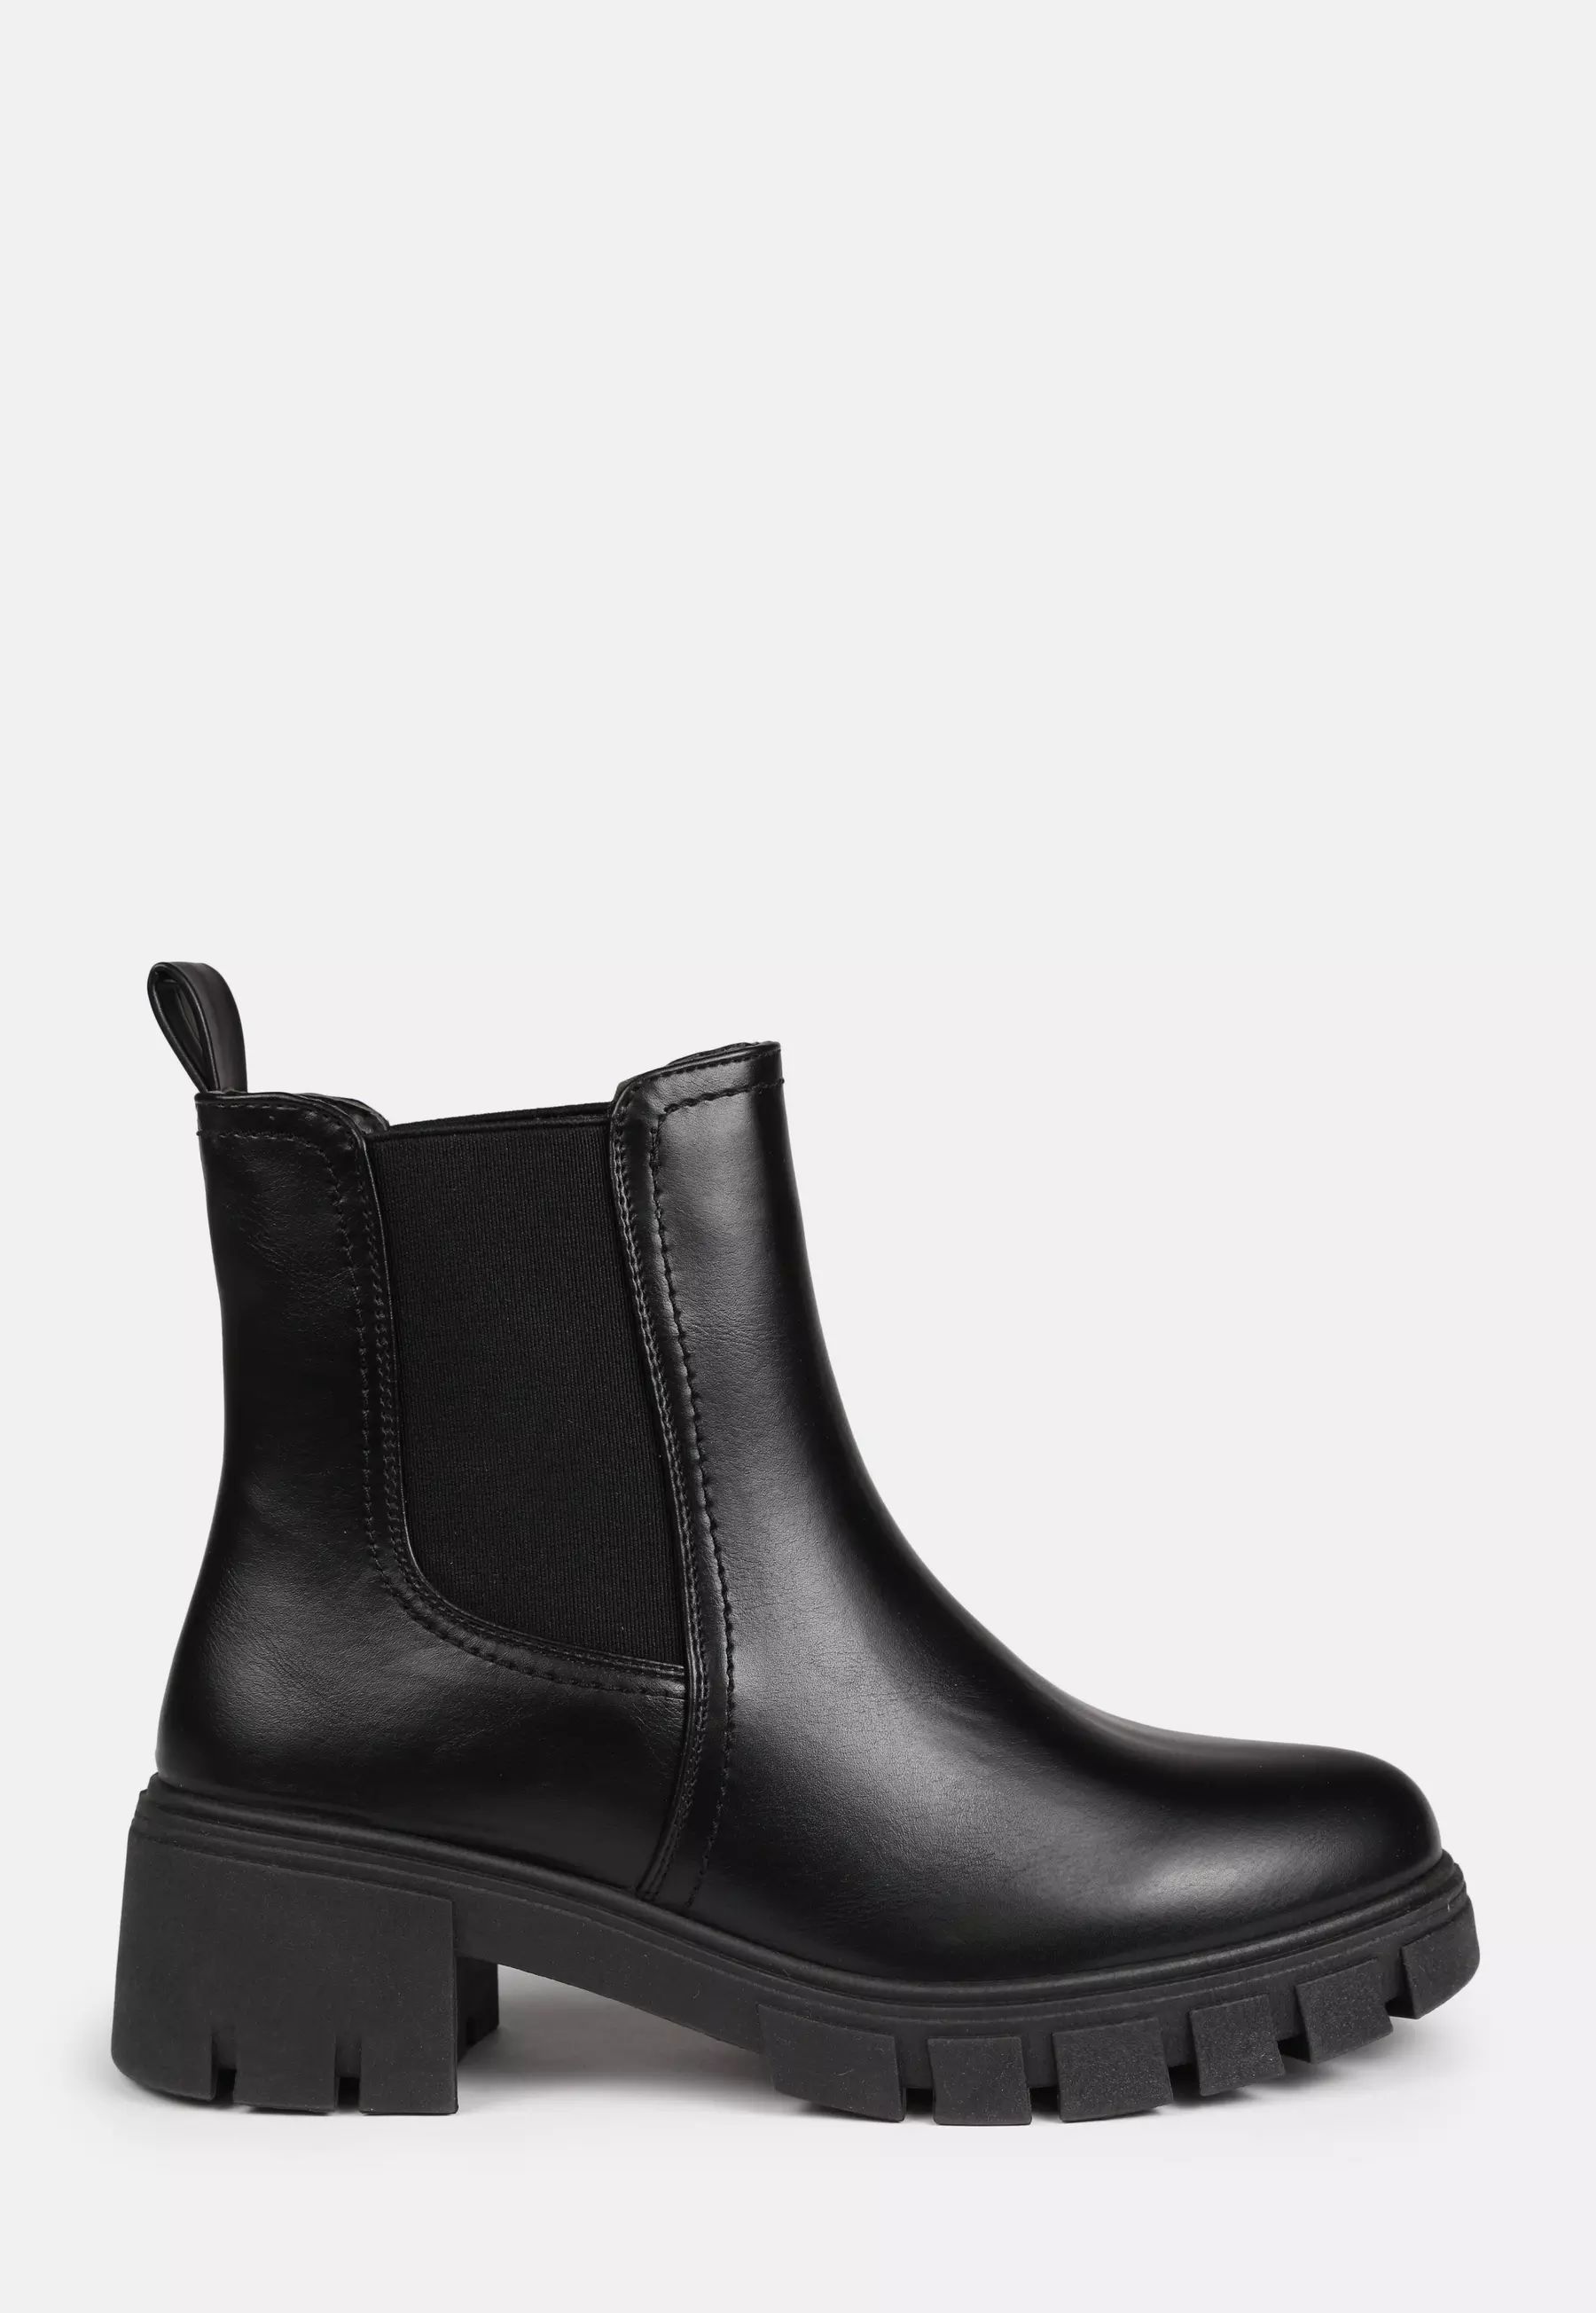 Missguided - Black Cleated Sole Chelsea Boots | Missguided (US & CA)